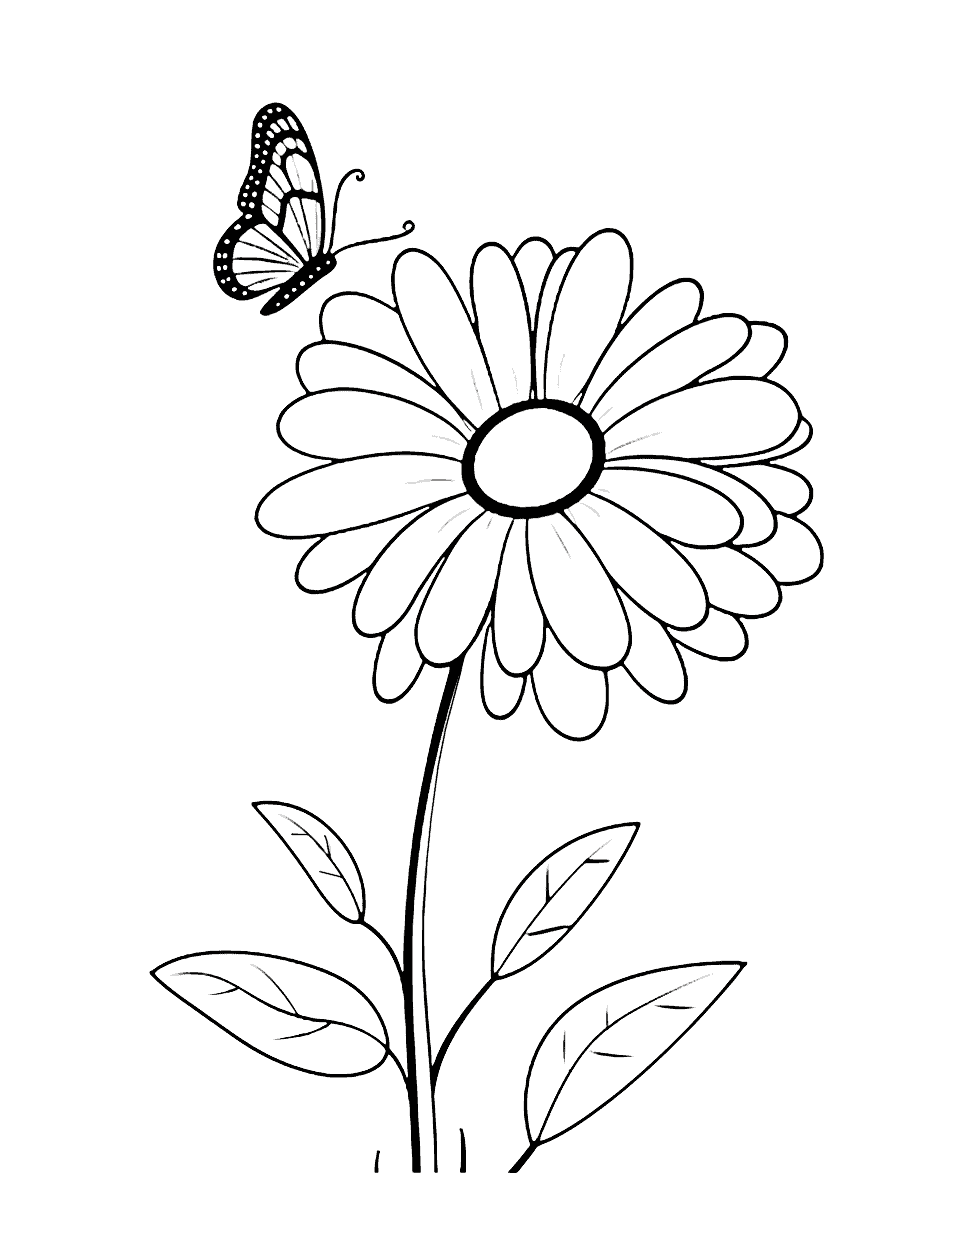 Butterfly Resting on Daisy Flower Coloring Page - A scene of a cute butterfly resting on a daisy.